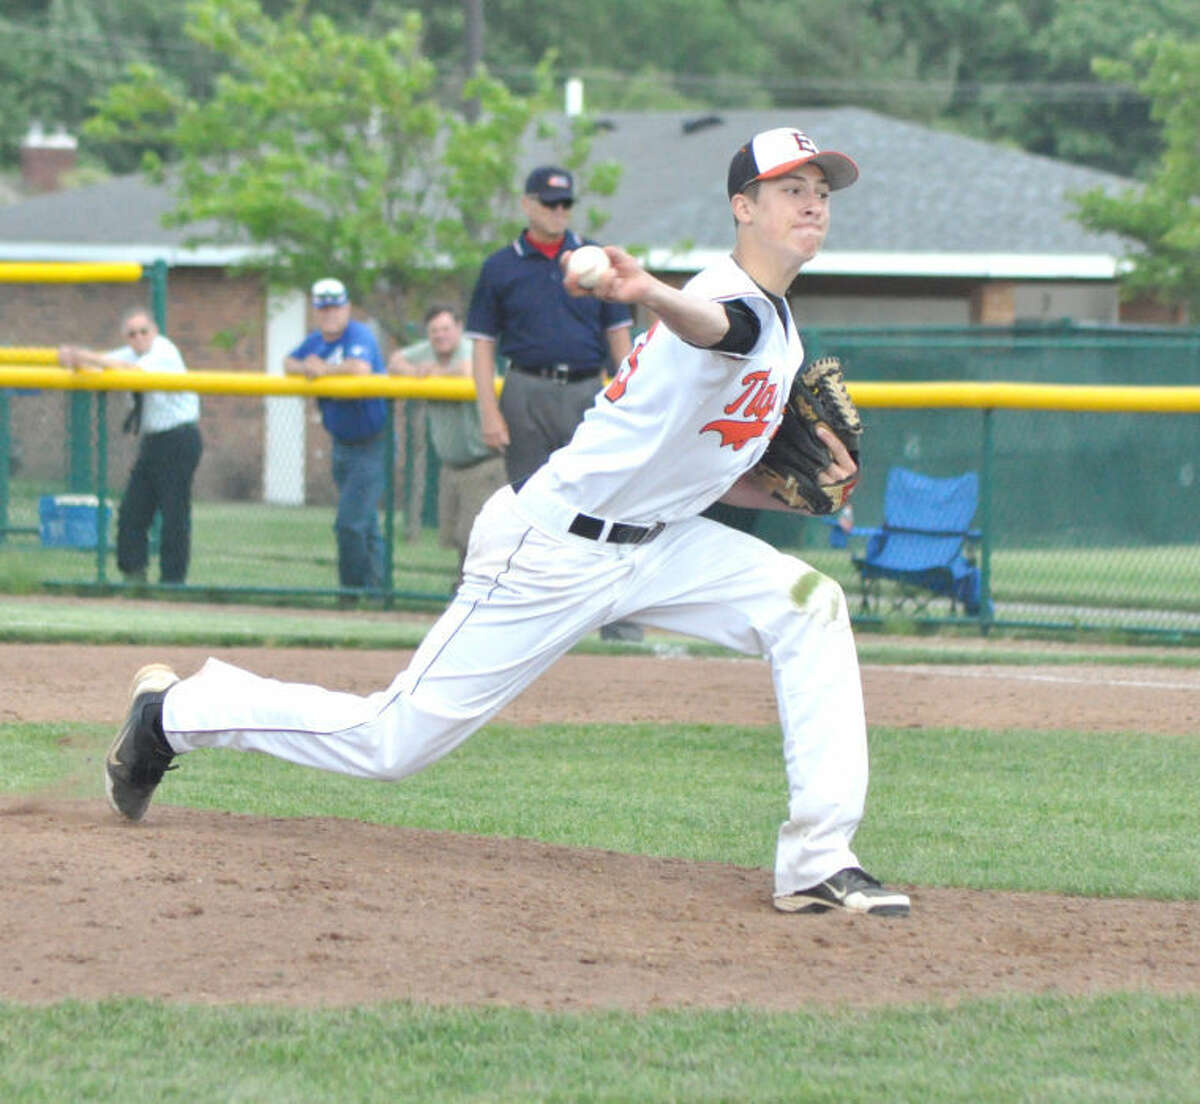 Edwardsville’s Cole Hagen delivers a pitch to the plate Wednesday at Tom Pile Field against Quincy in the Class 4A Edwardsville Regional semifinals.